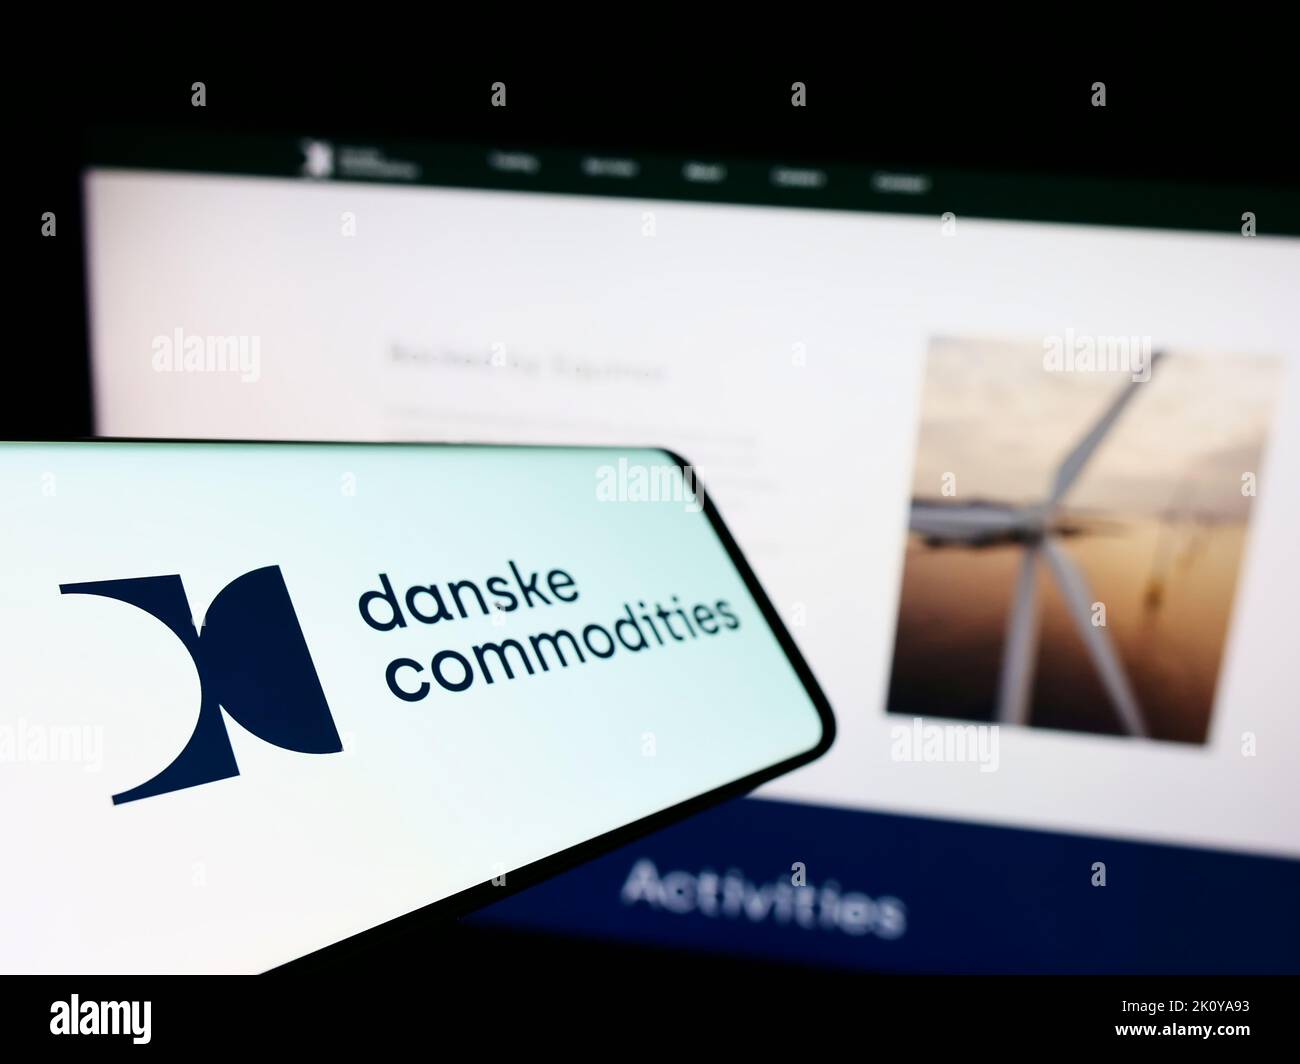 Mobile phone with logo of energy trading company Danske Commodities AS on screen in front of business website. Focus on left of phone display. Stock Photo